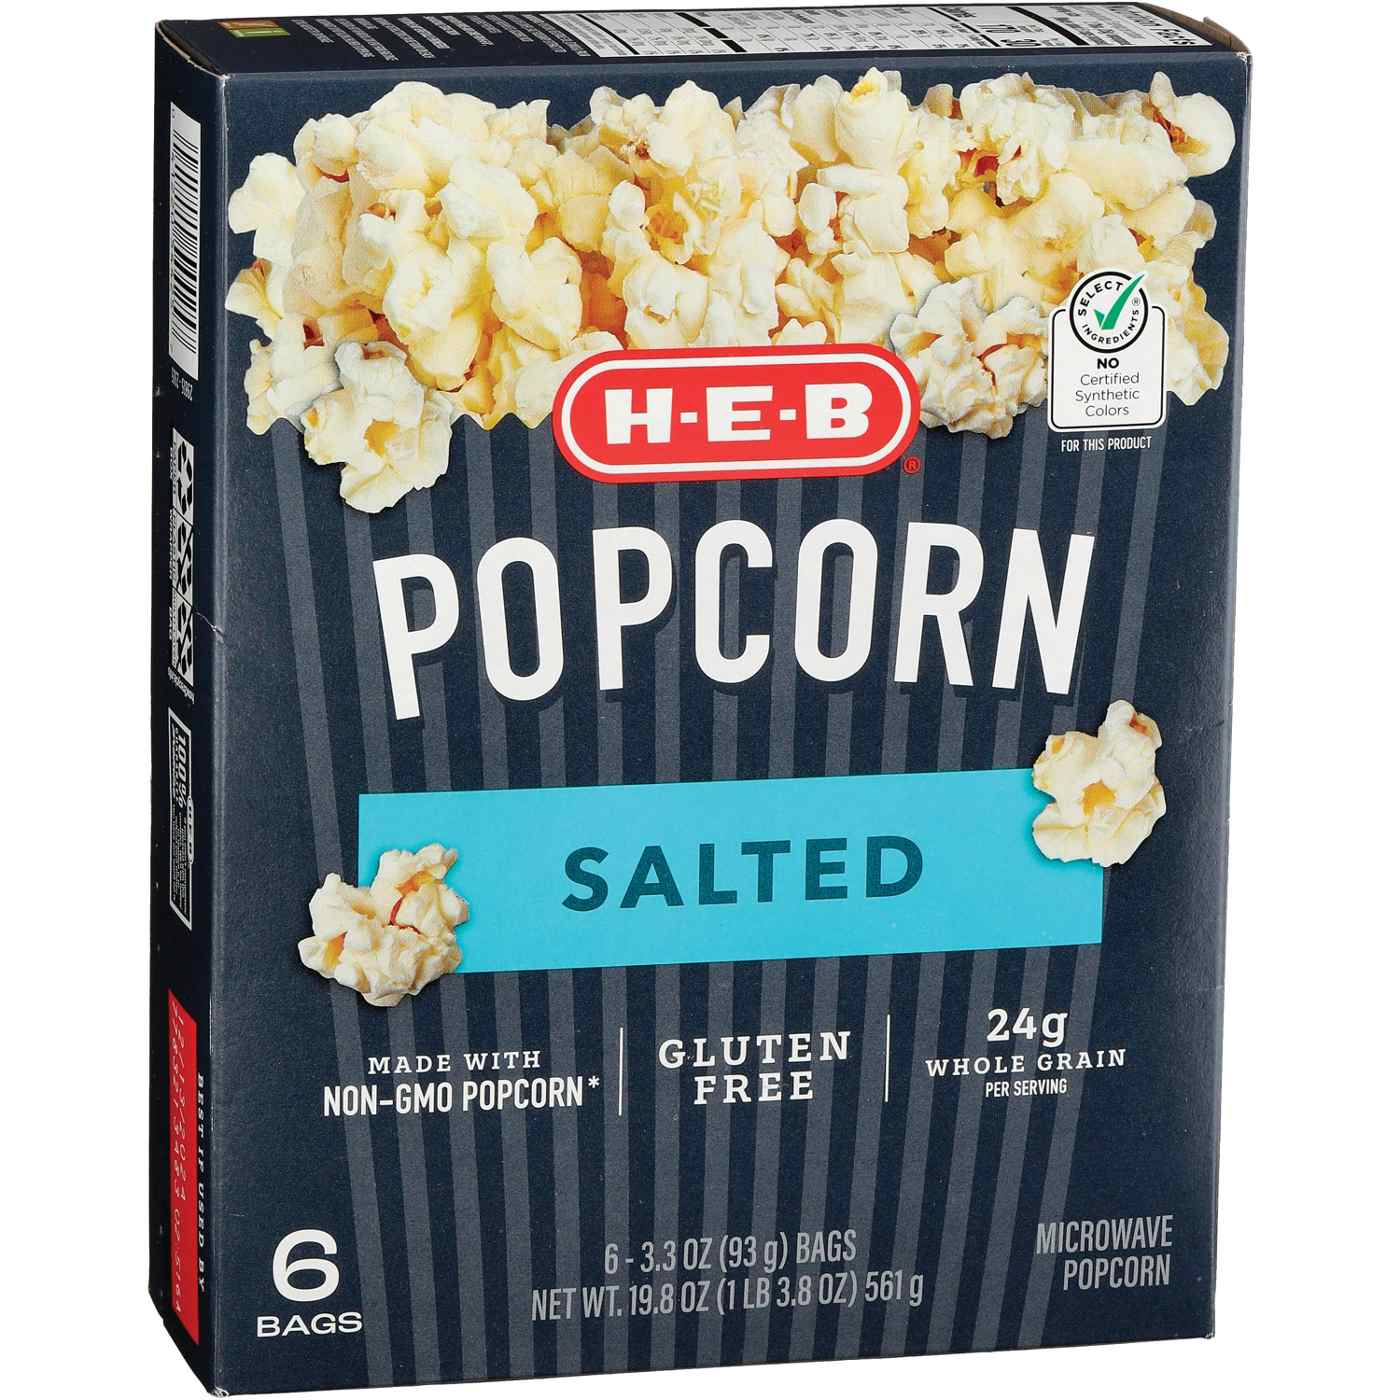 H-E-B Microwave Popcorn - Salted; image 2 of 2